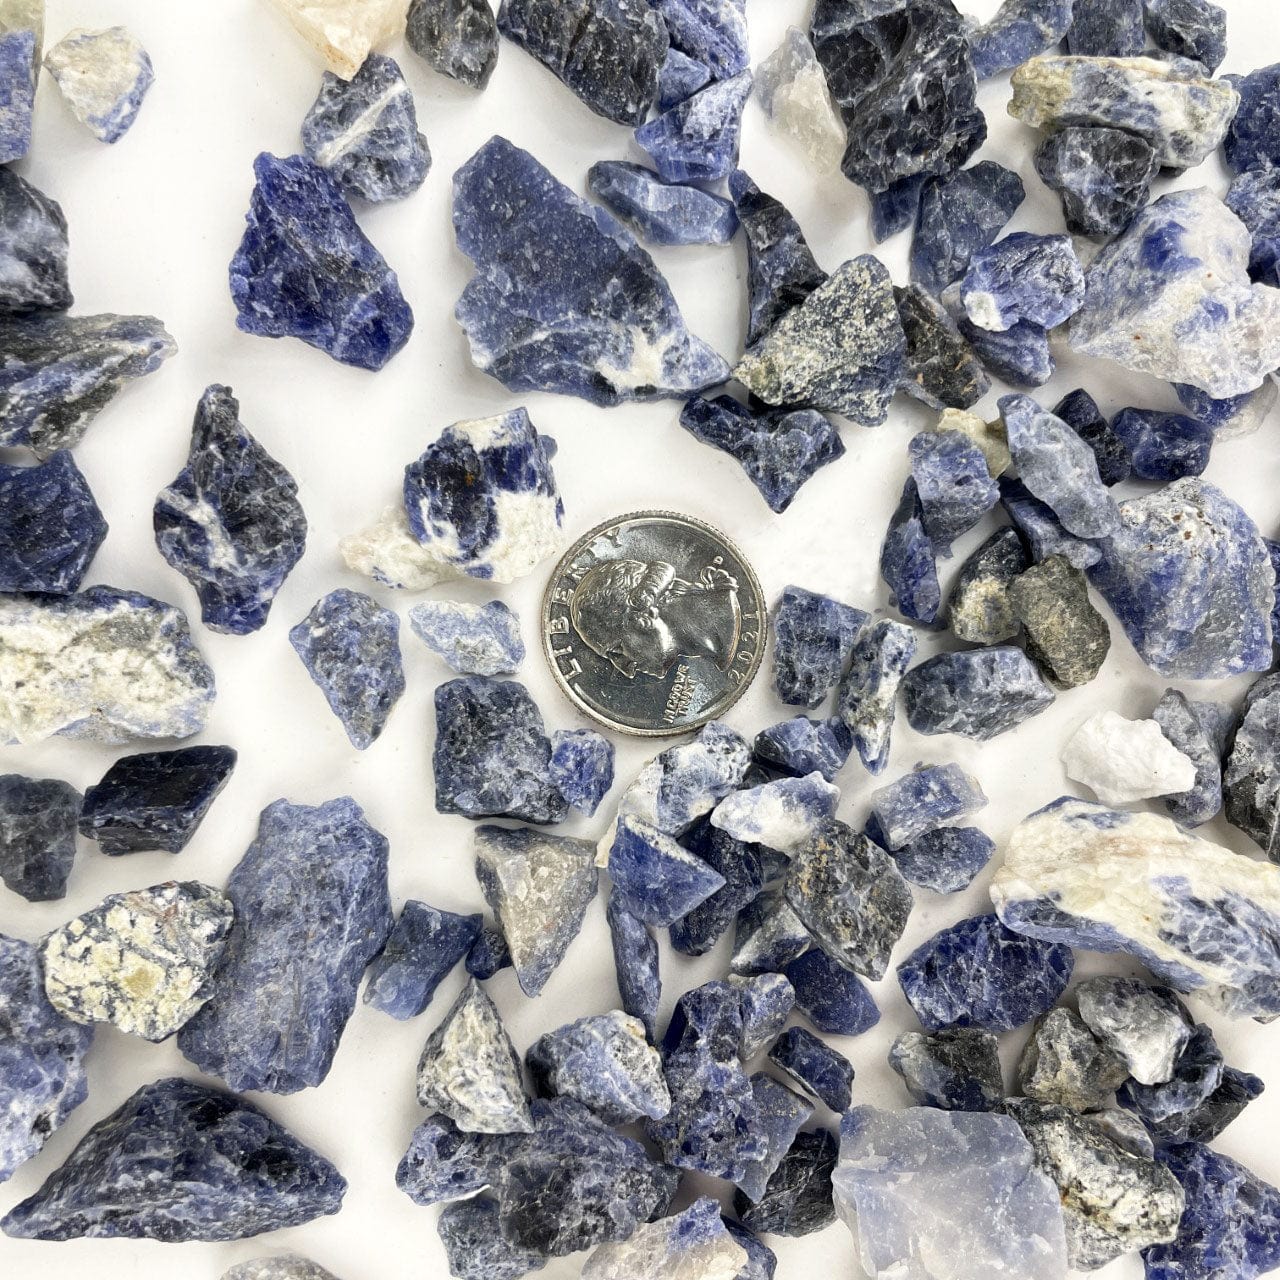 Sodalite Stones on a table with a quarter for size